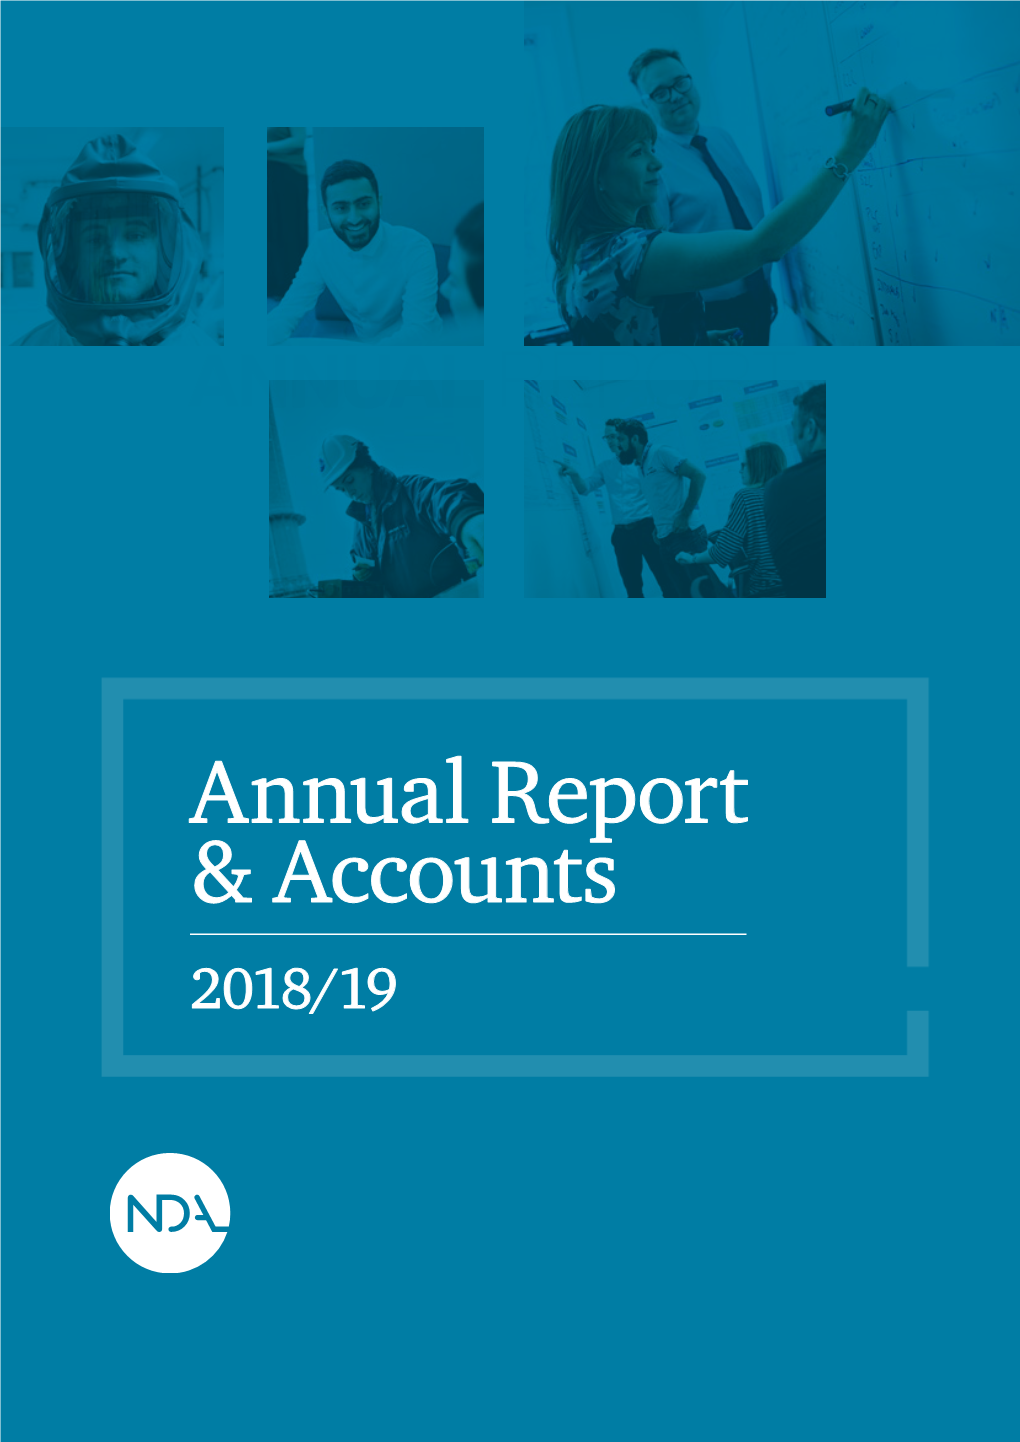 NDA Annual Report and Accounts 2018 to 2019